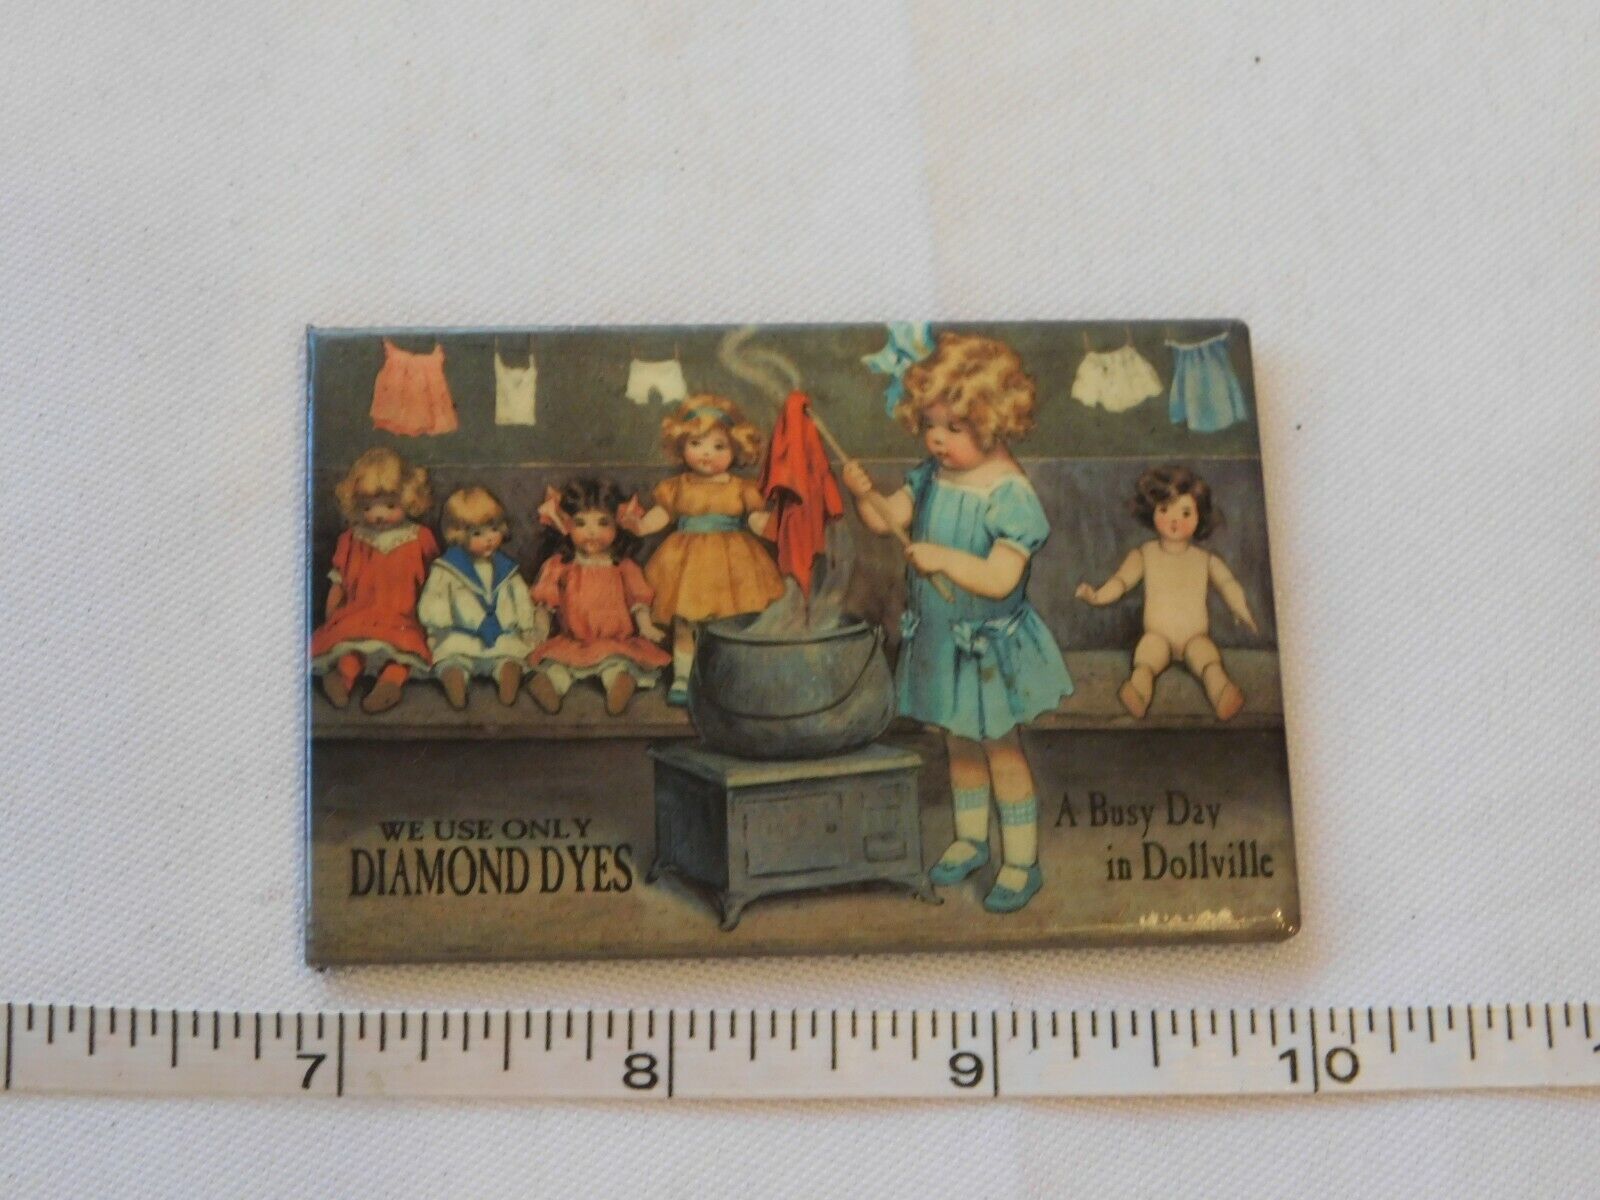 Primary image for Desperate Enterprises A Busy Day in Dollville magnet 2 1/8" X 3" Pre-owned